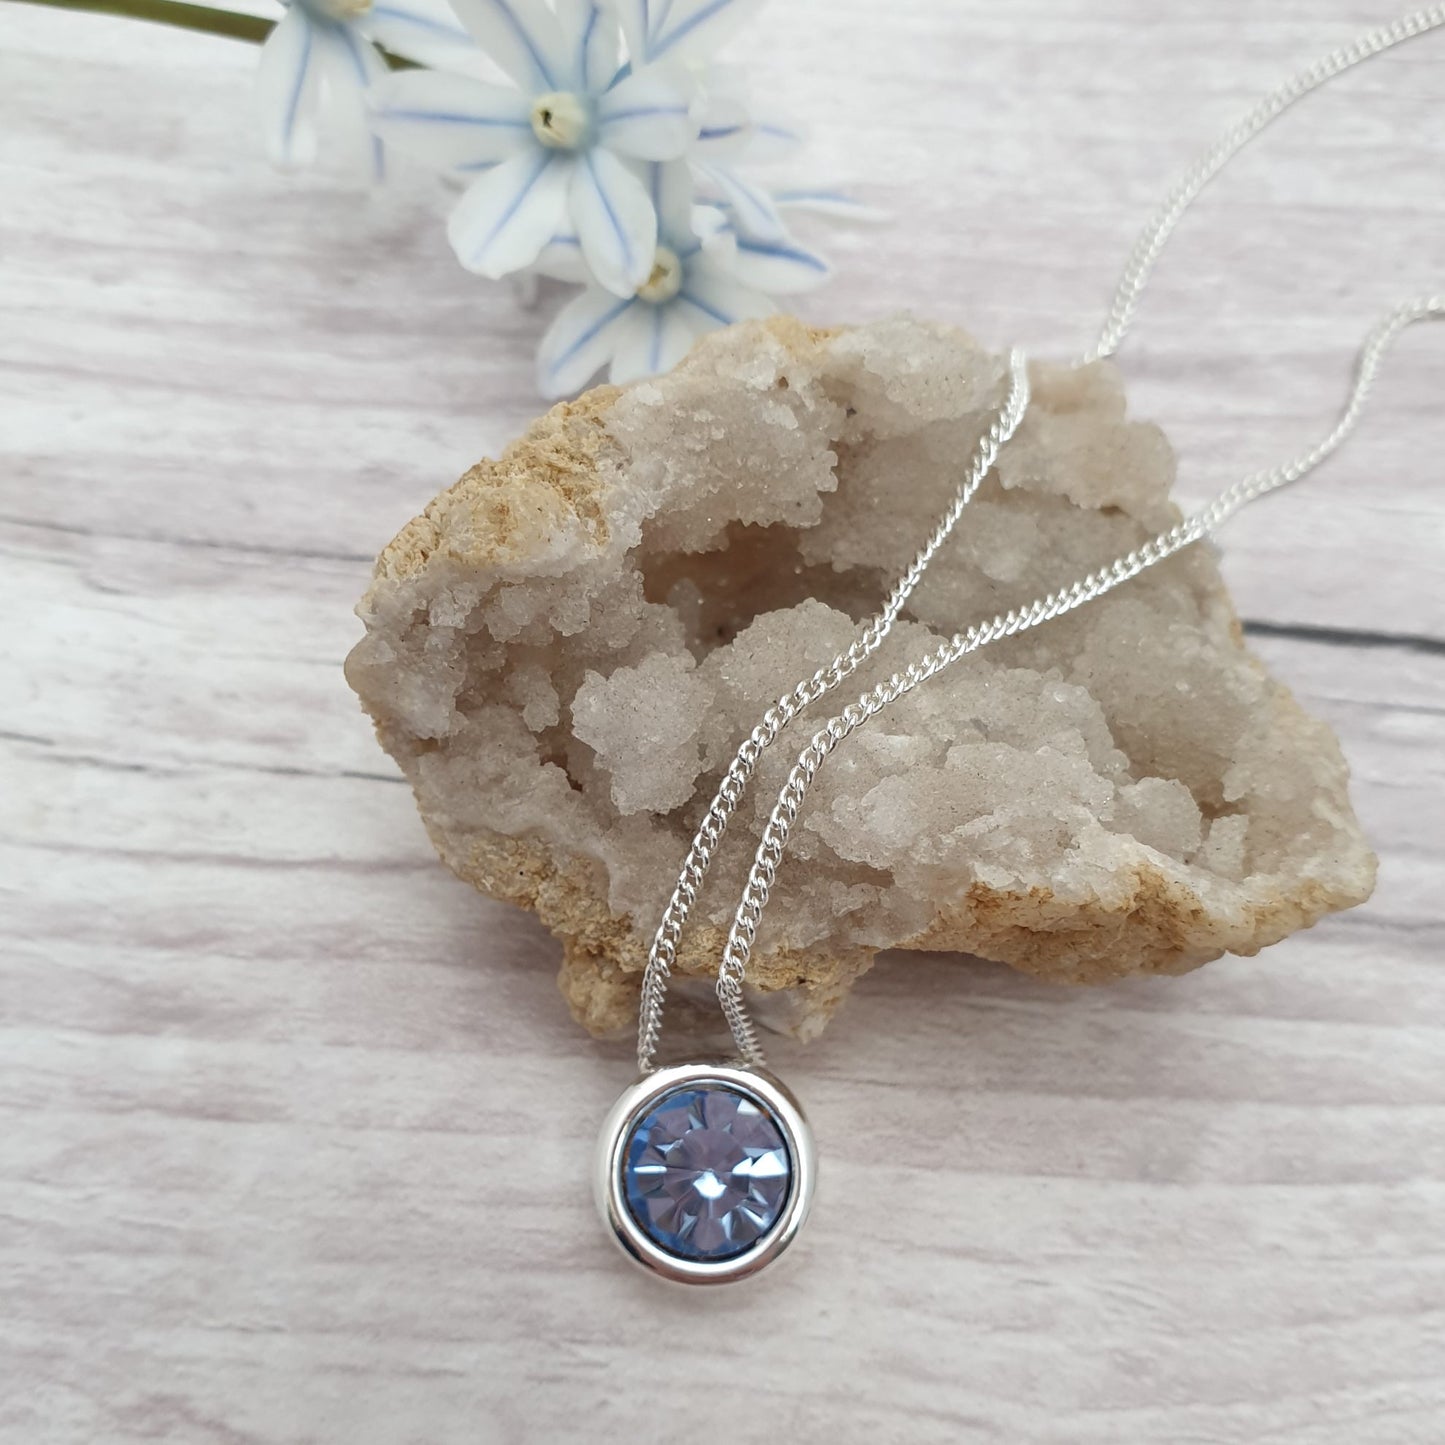 Silver plated necklace with blue cz crystal pendant